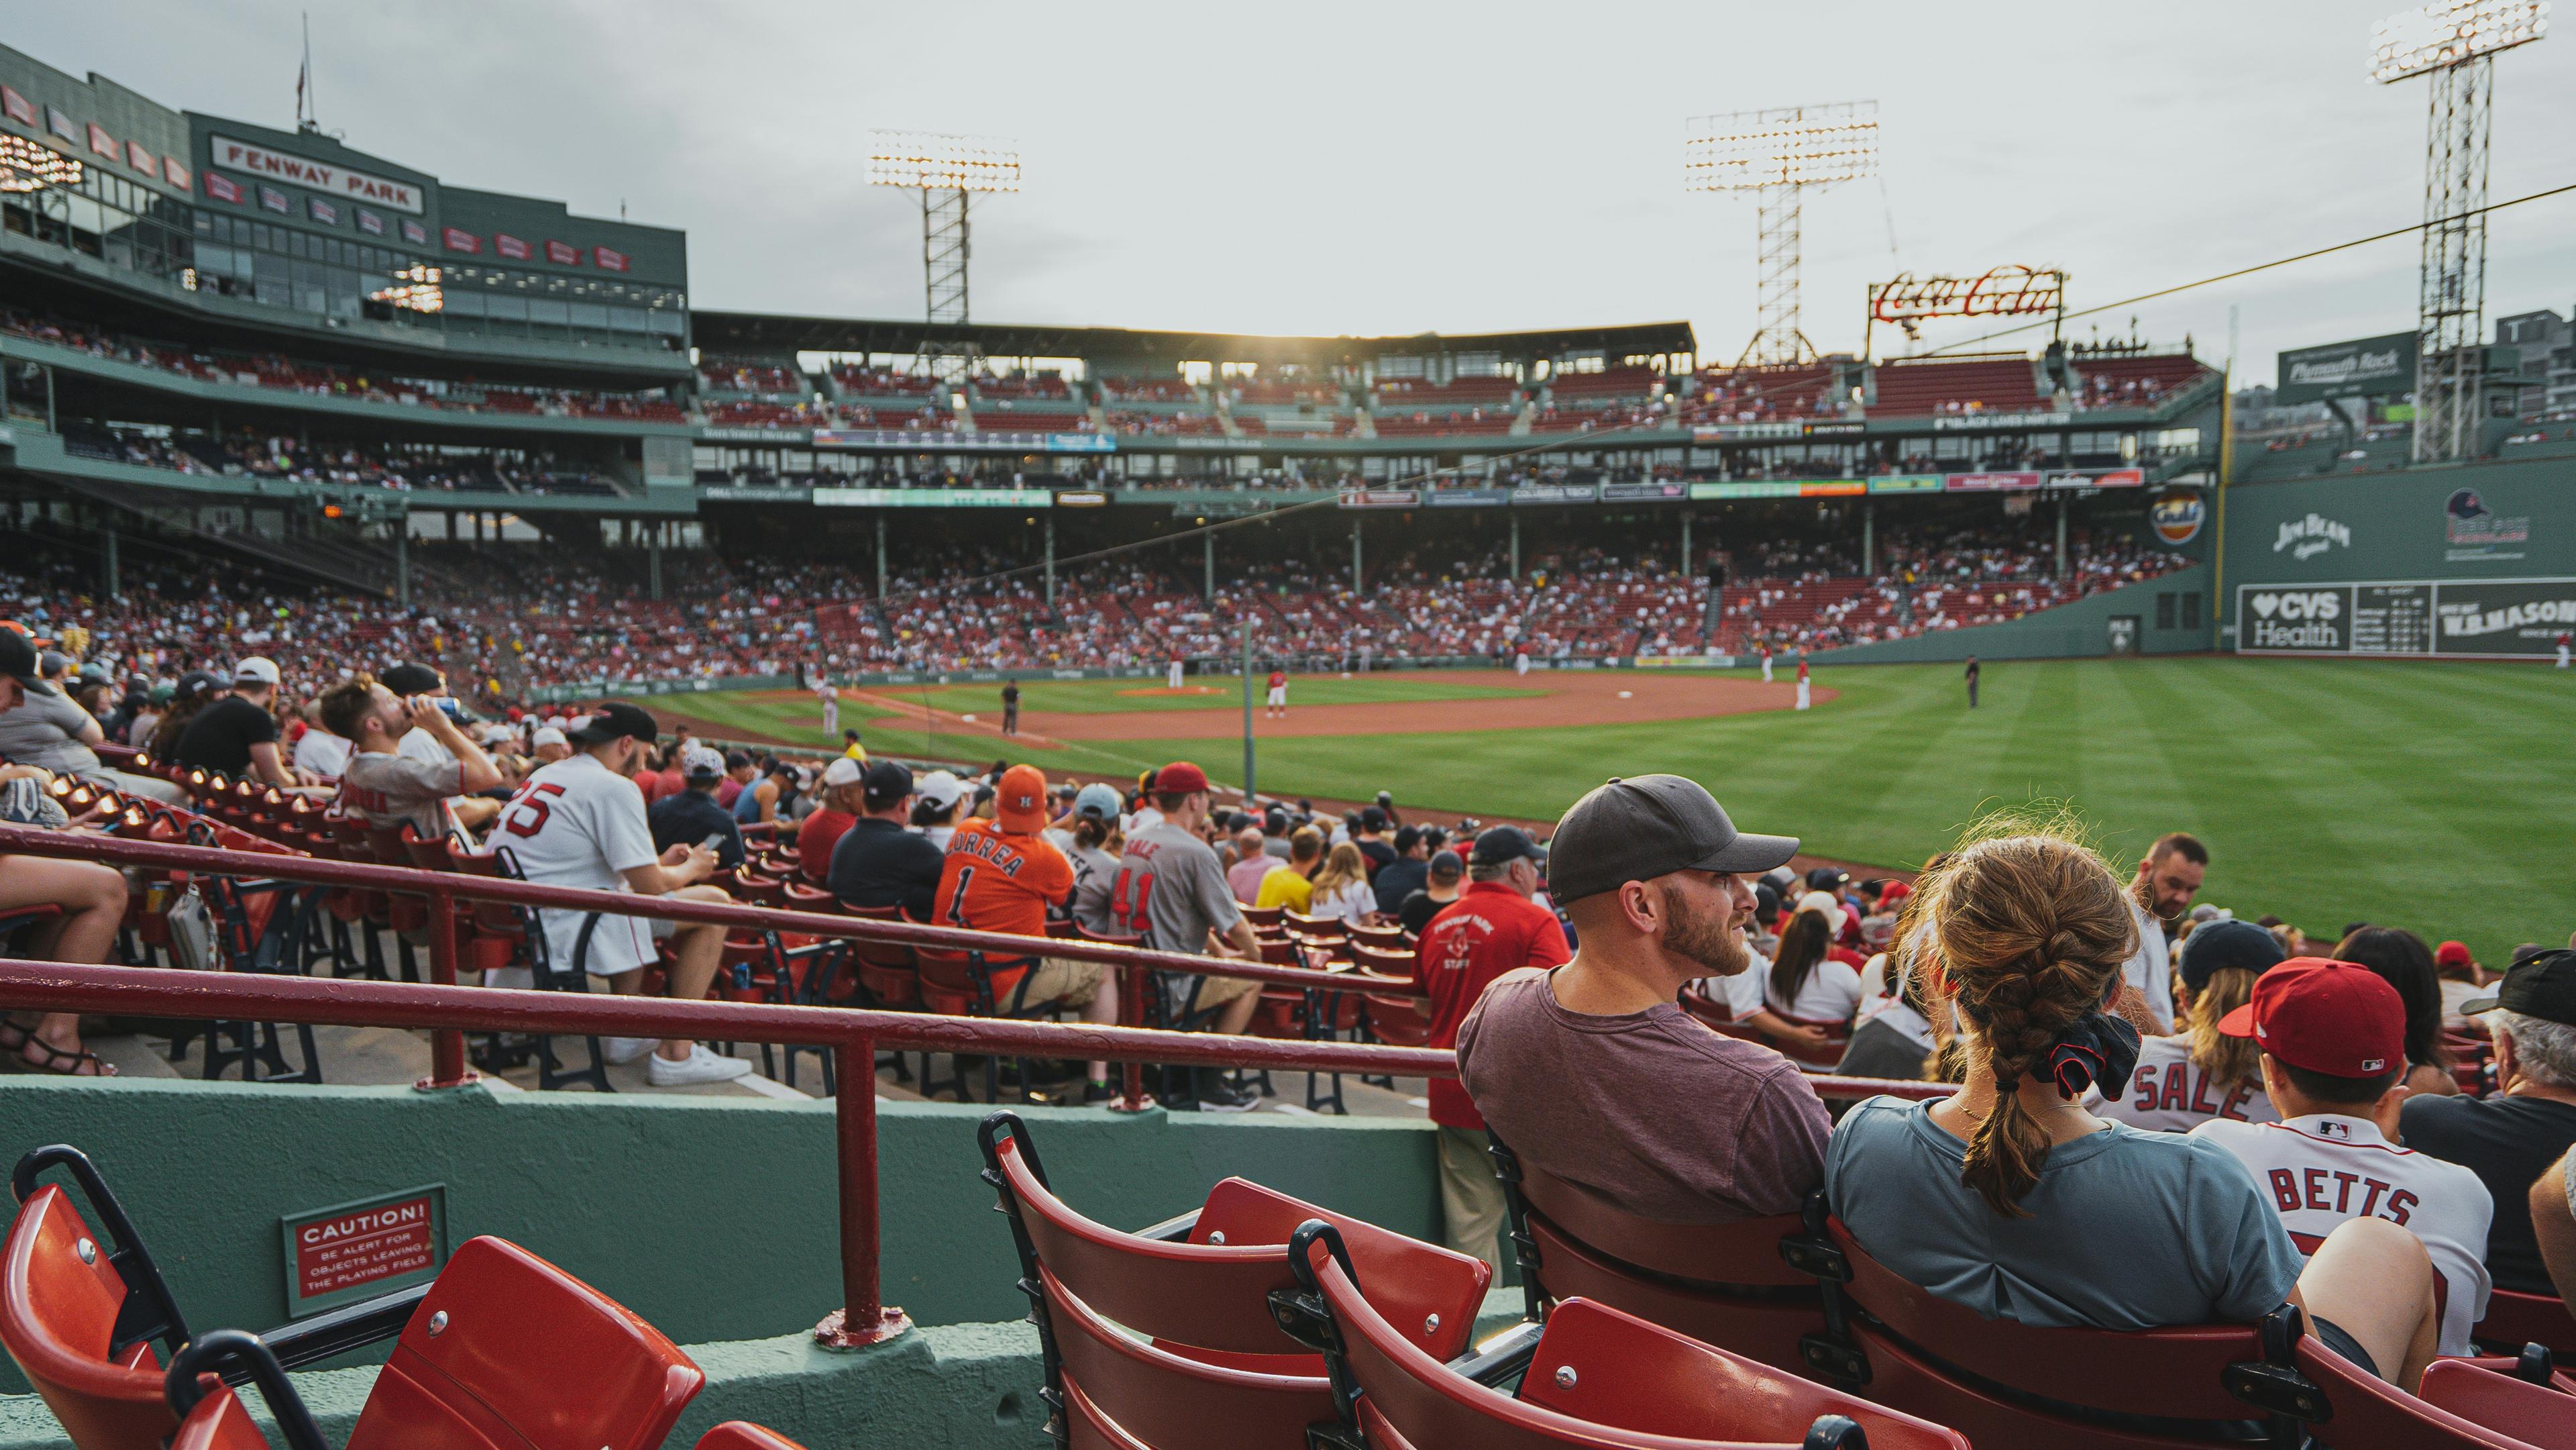 fans sit in the stands at the Boston Red Sox baseball stadium